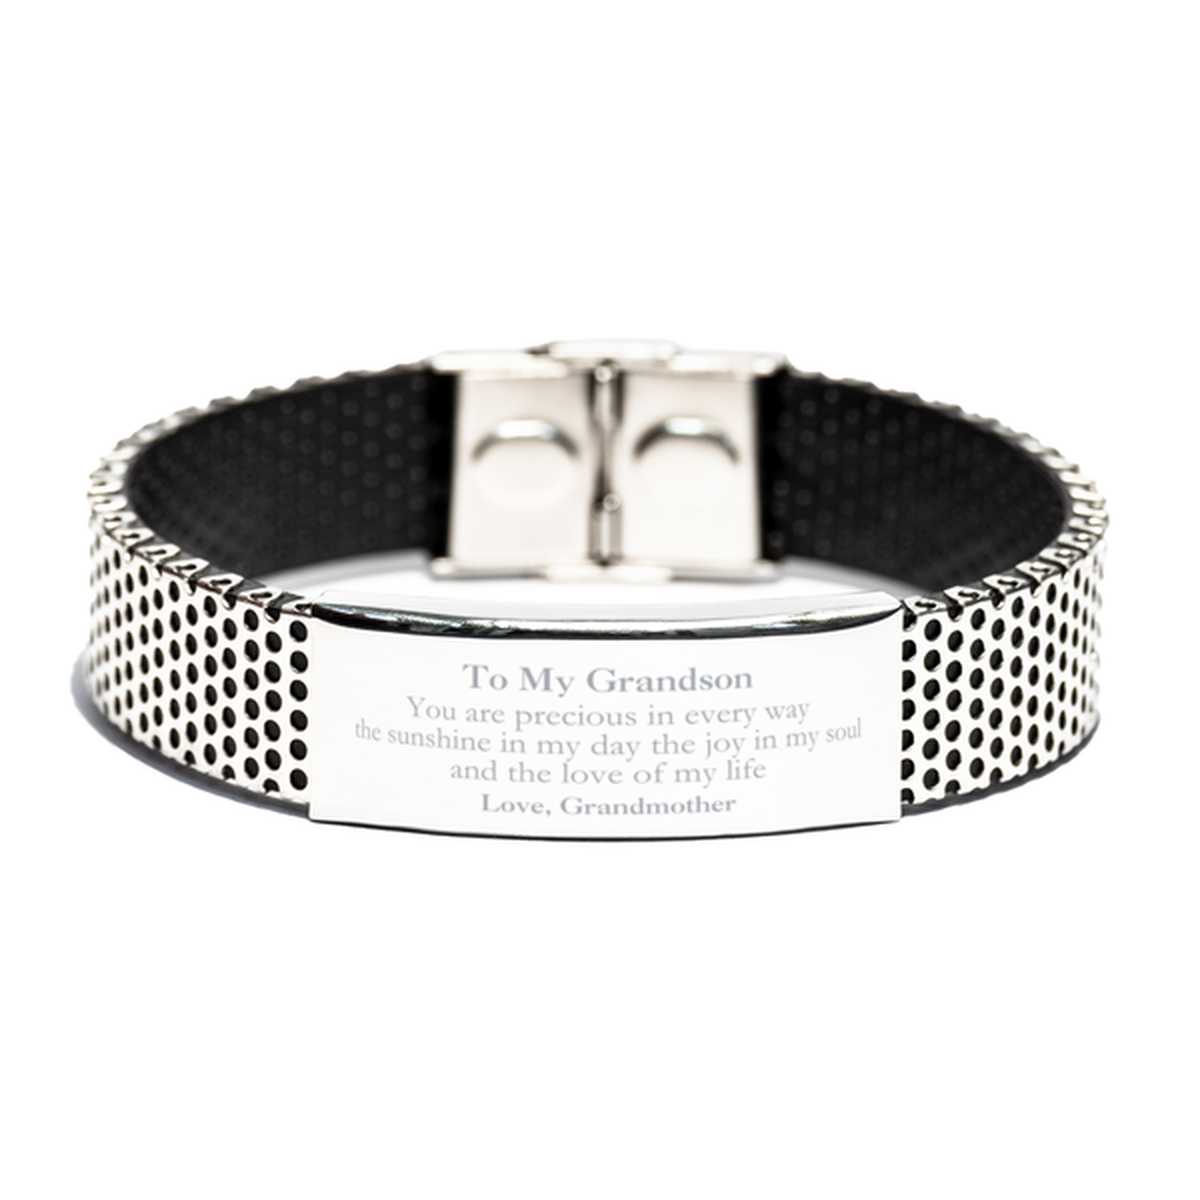 Graduation Gifts for Grandson Stainless Steel Bracelet Present from Grandmother, Christmas Grandson Birthday Gifts Grandson You are precious in every way the sunshine in my day. Love, Grandmother